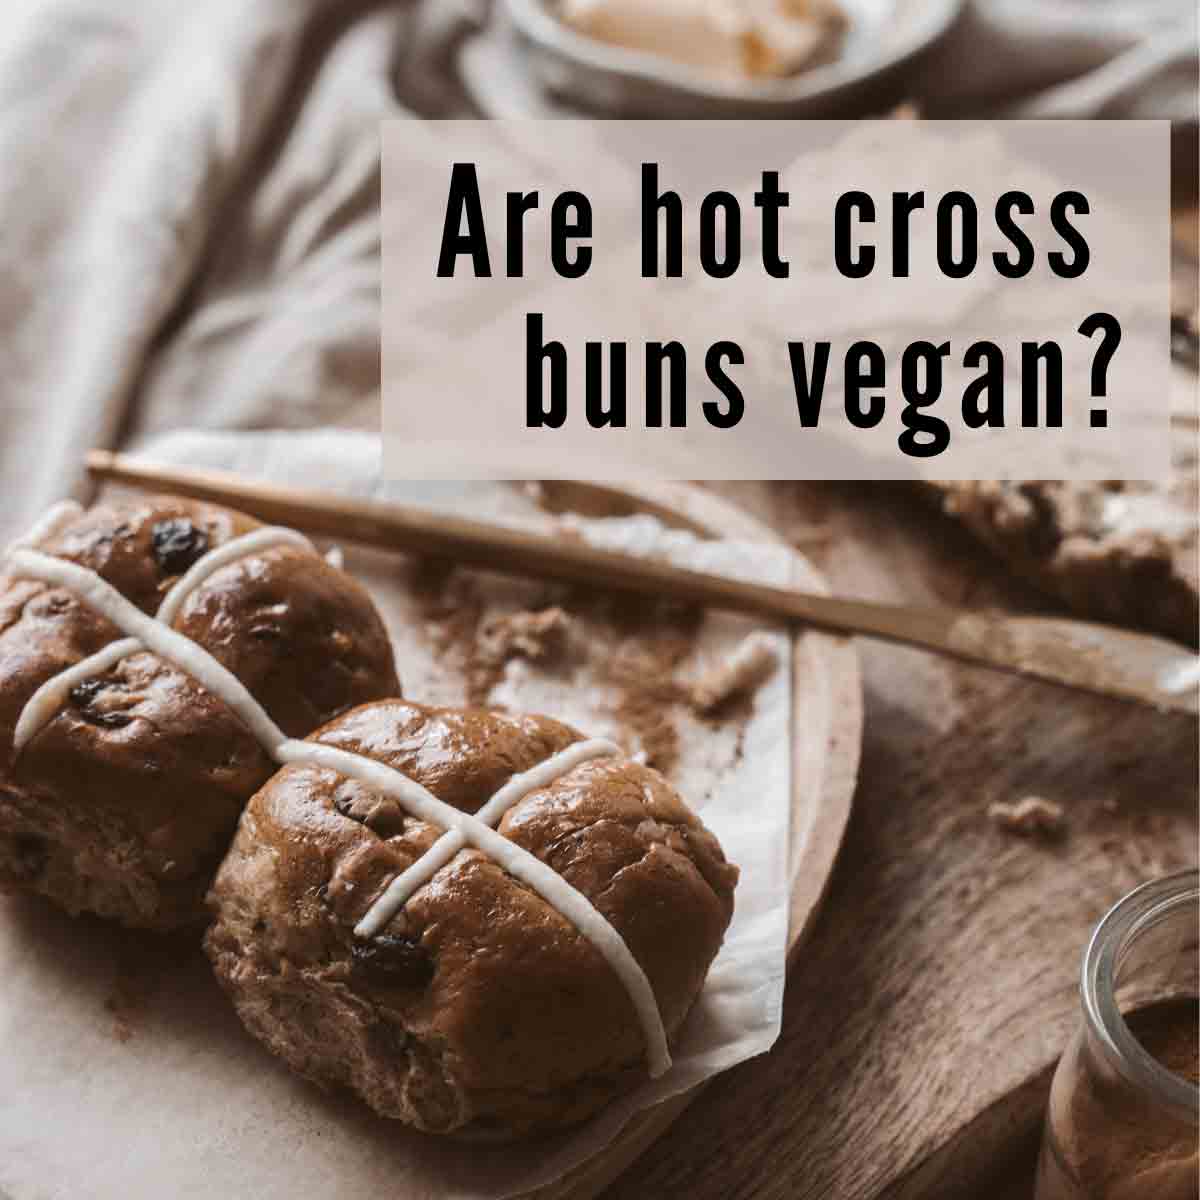 Image Of Hot Cross Buns With Text Overlay That Reads 'are Hot Cross Buns Vegan'